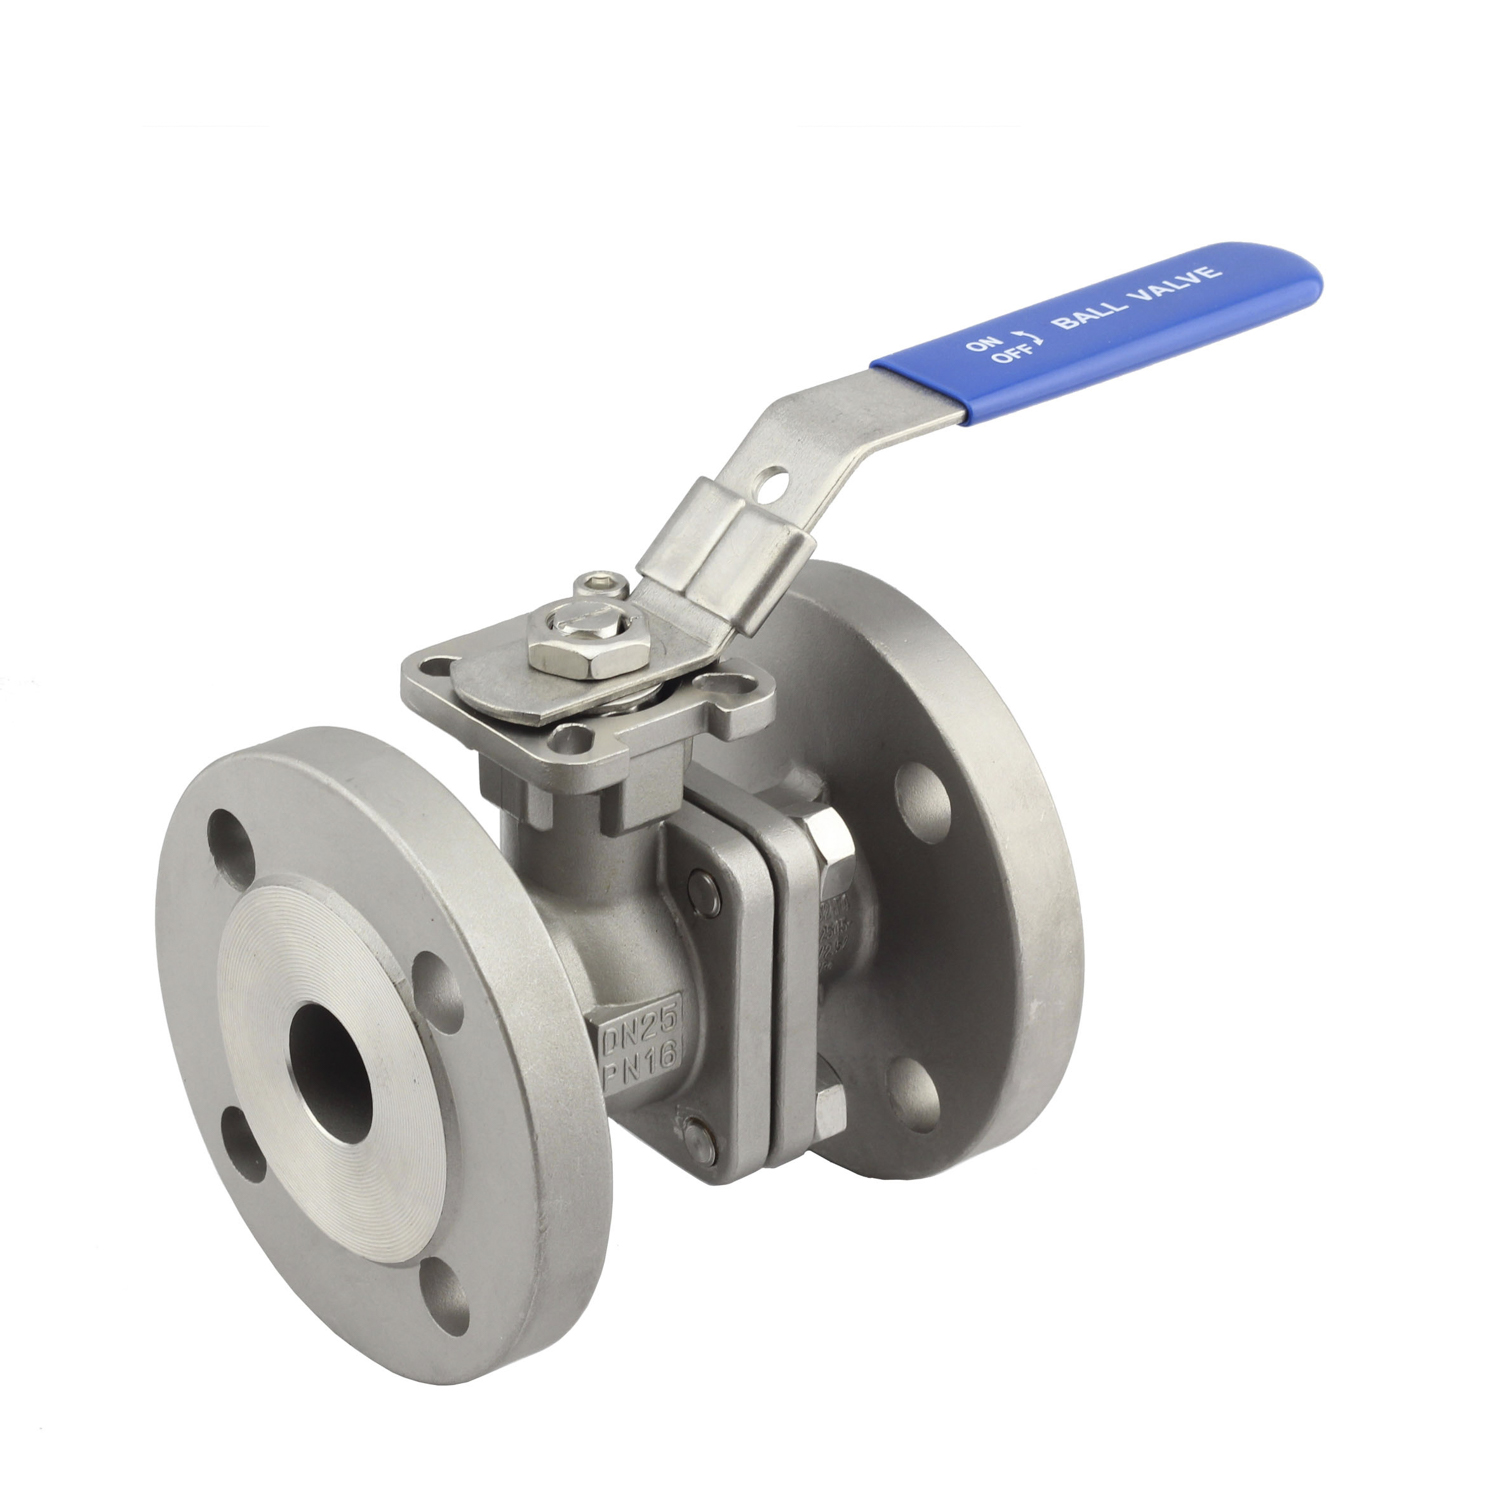 114 Ss316304 Ansijisdin 2pc Flanged Ball Valve With Locking Device Buy Stainess Steel Ball 6473